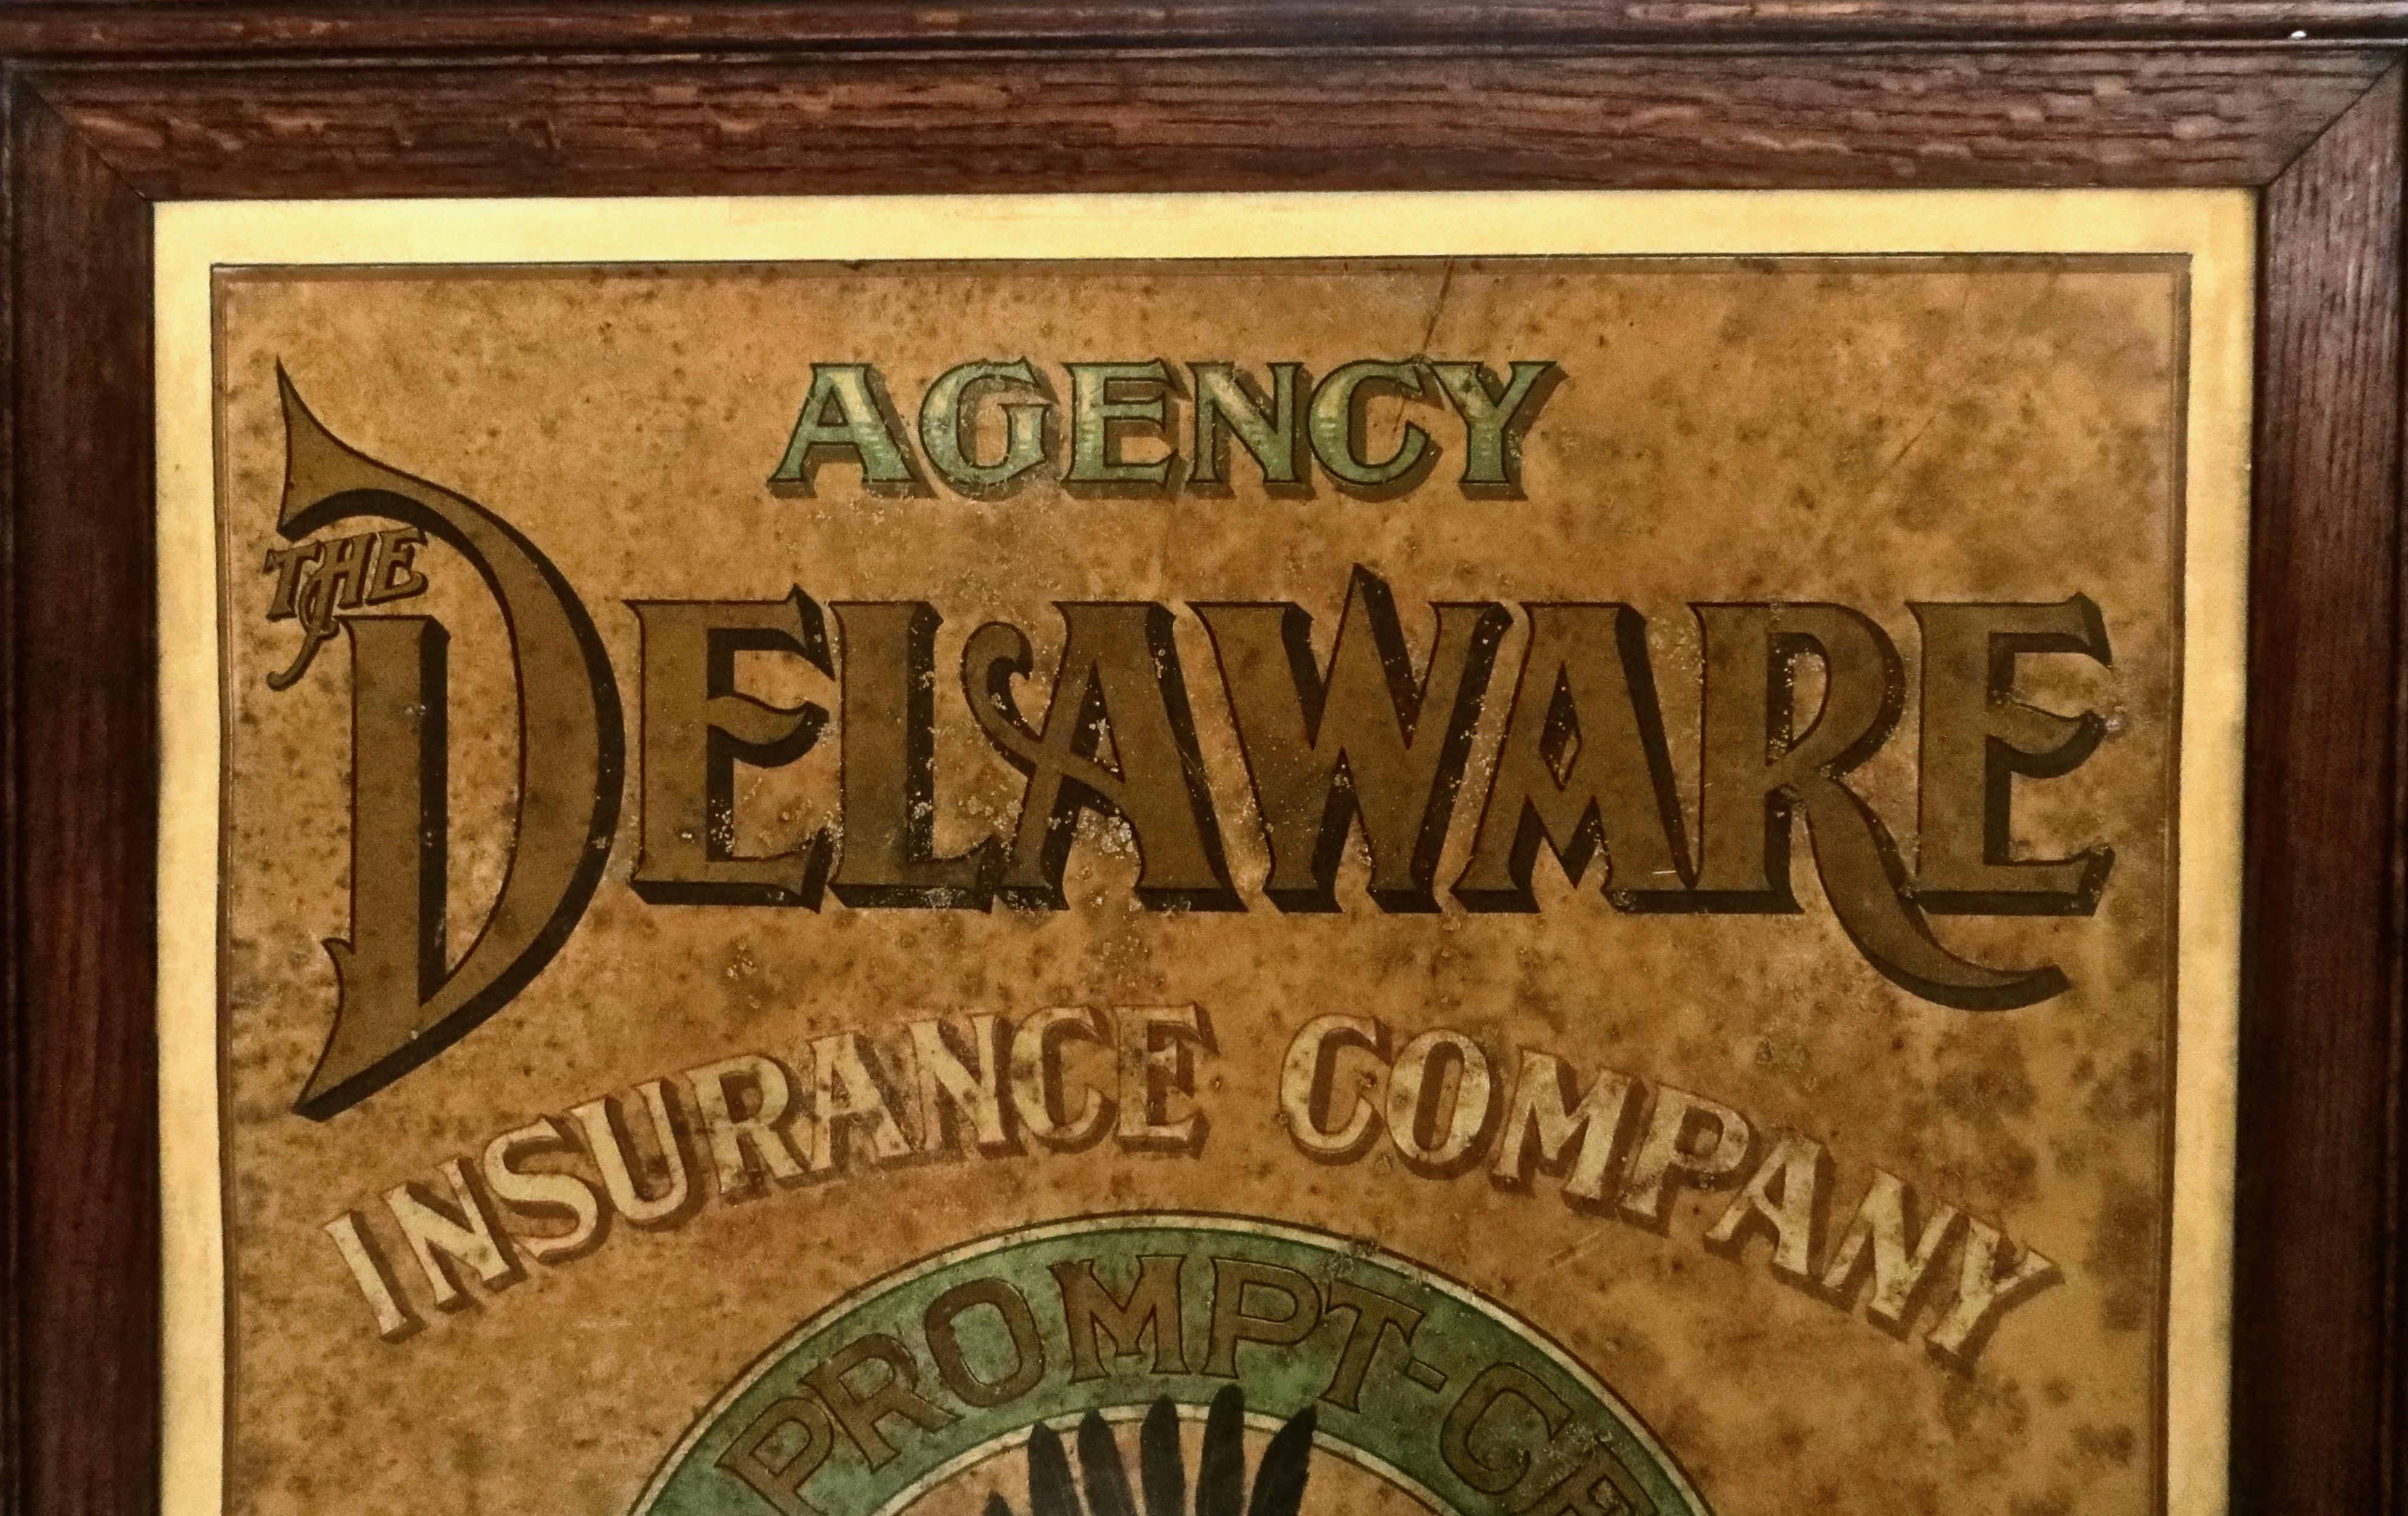 This is a very rare and early (circa 1885) tin advertising sign, commissioned by the Delaware Insurance Company, located and founded in Philadelphia in 1835. It was probably made by noted late 19th century sign maker, Sentenne & Green, of New York